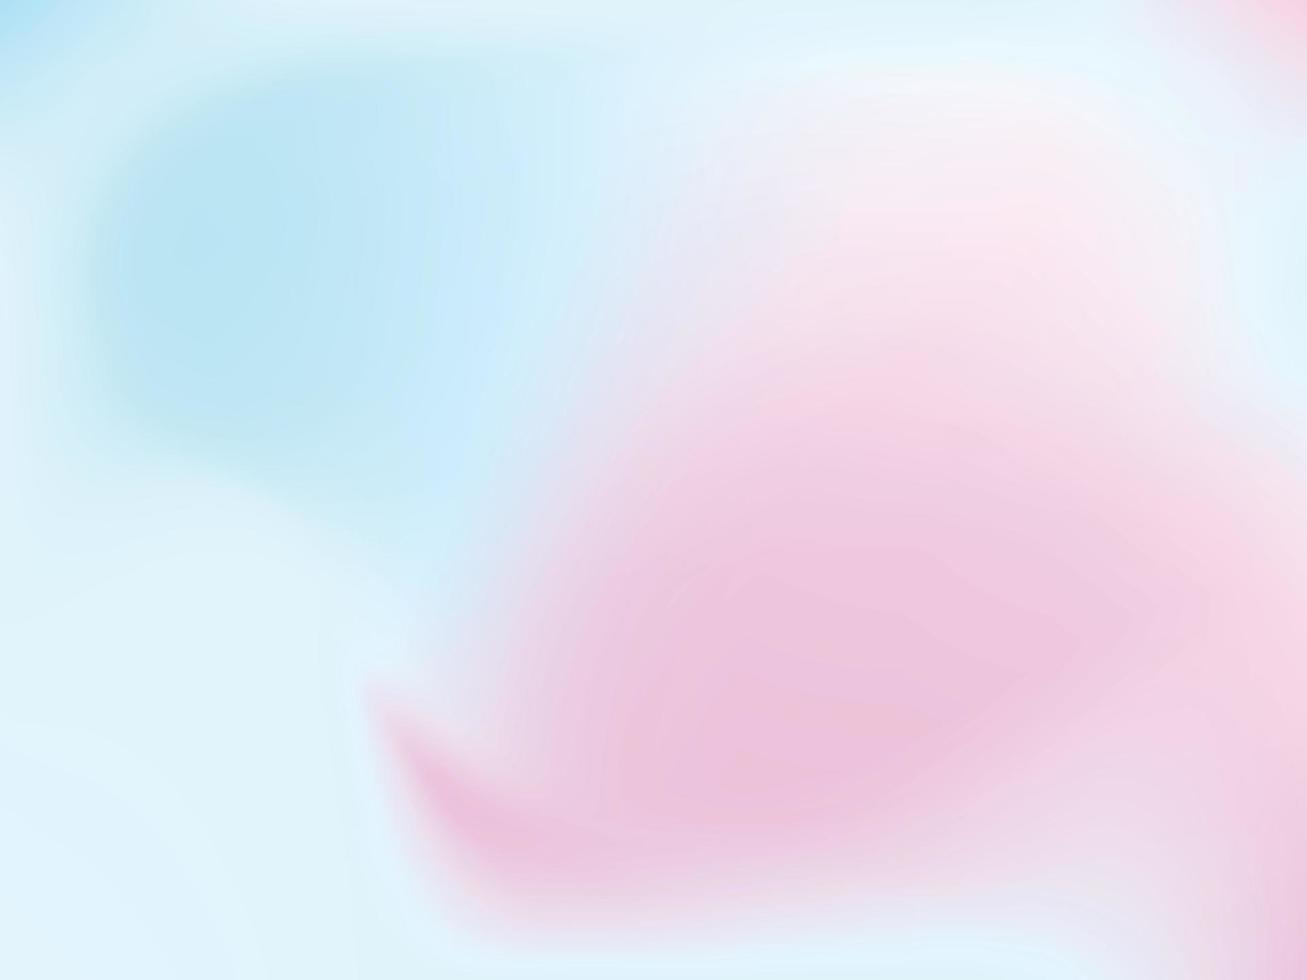 Blue and pink color gradient vector